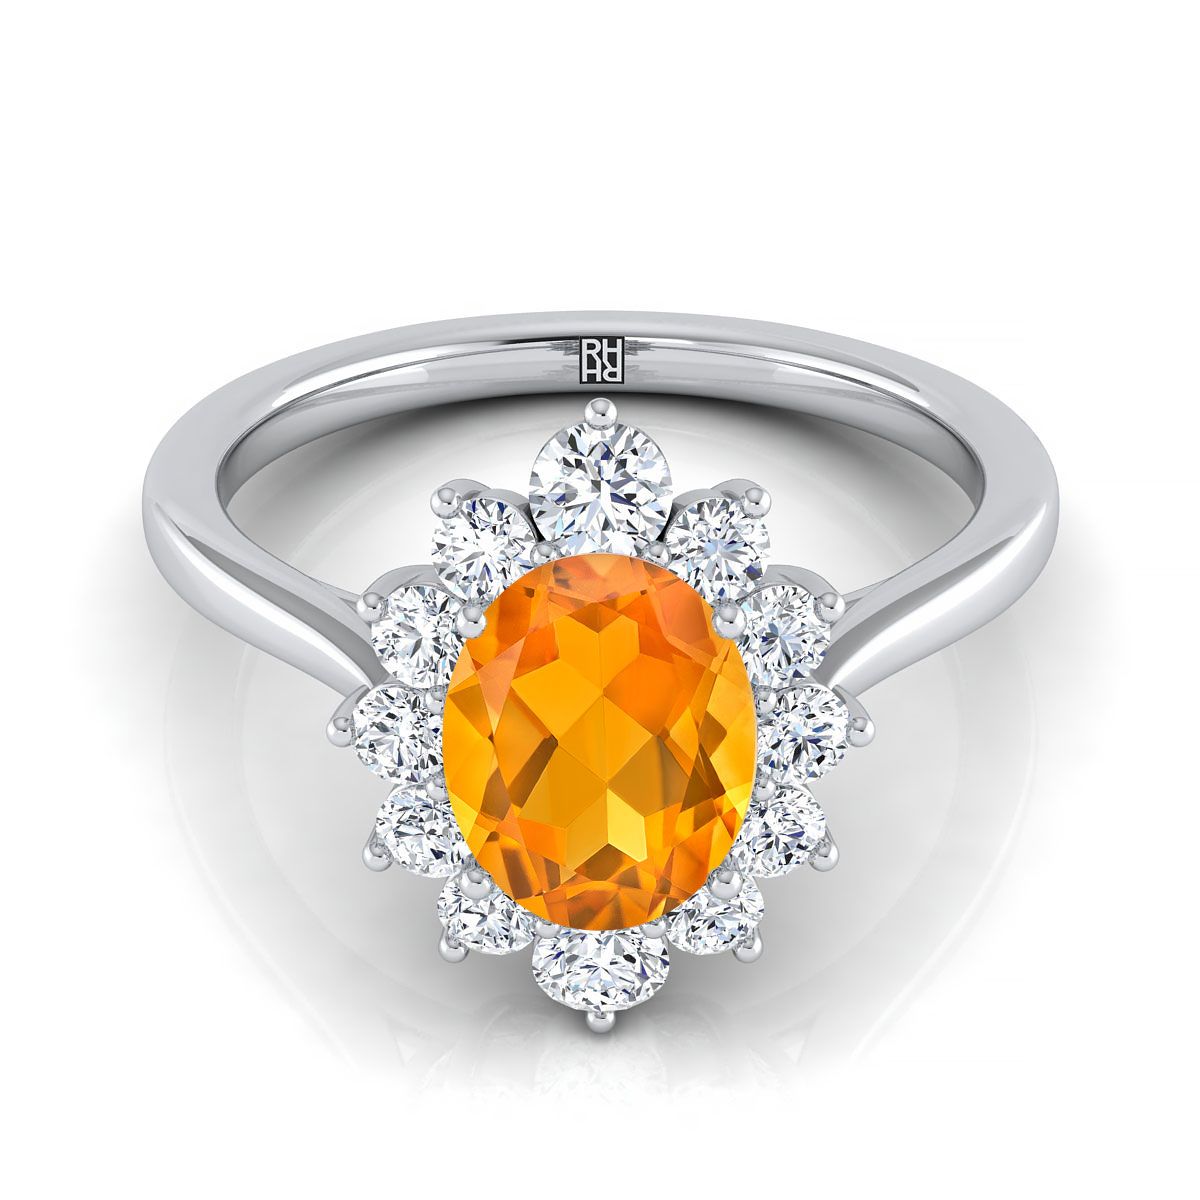 18K White Gold Oval Citrine Floral Diamond Halo Engagement Ring -1/2ctw